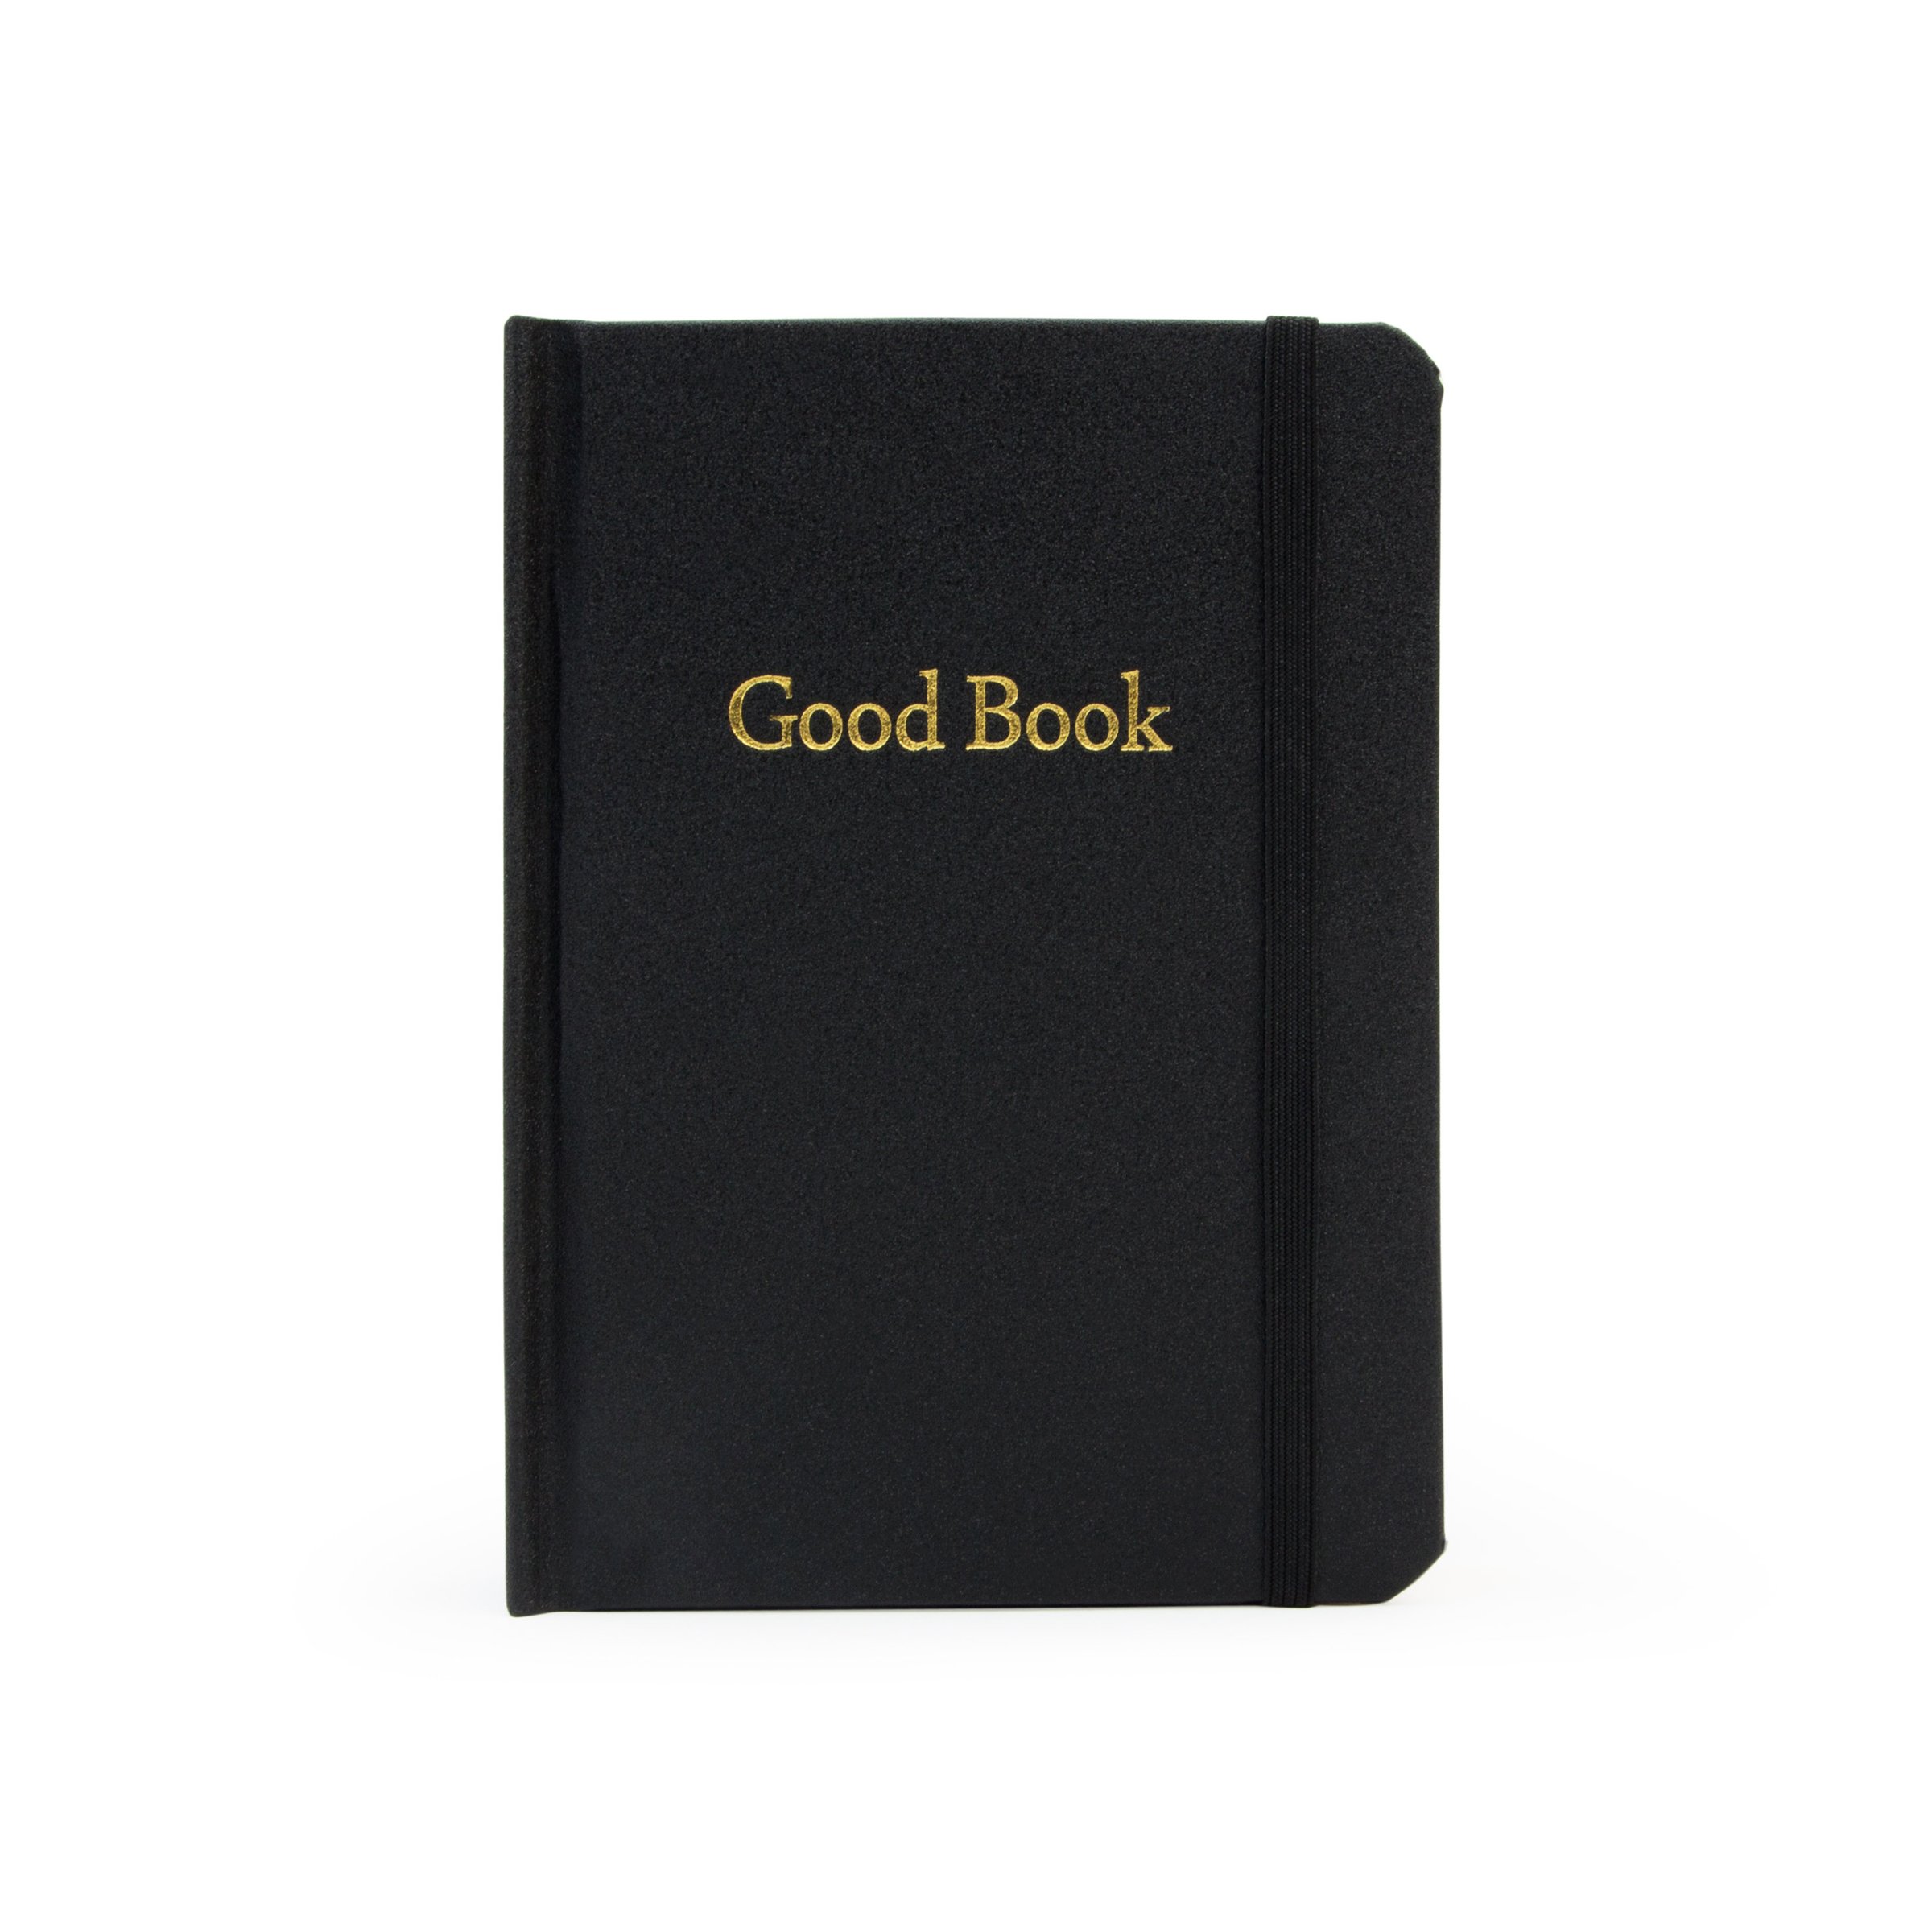 The Good Book